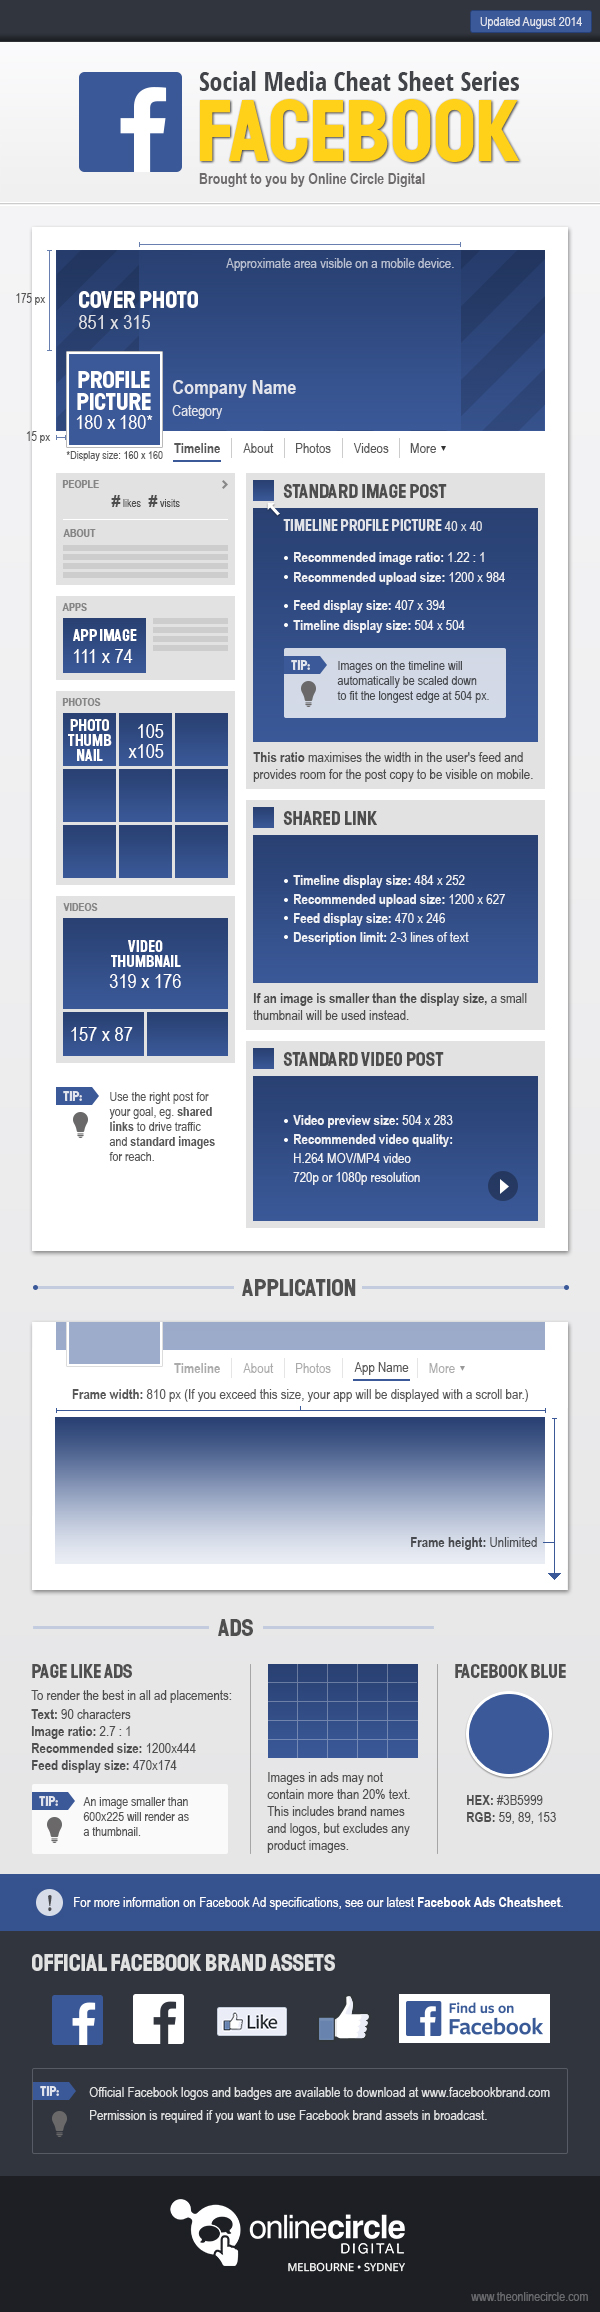 facebook-sizes-dimentions-infographic